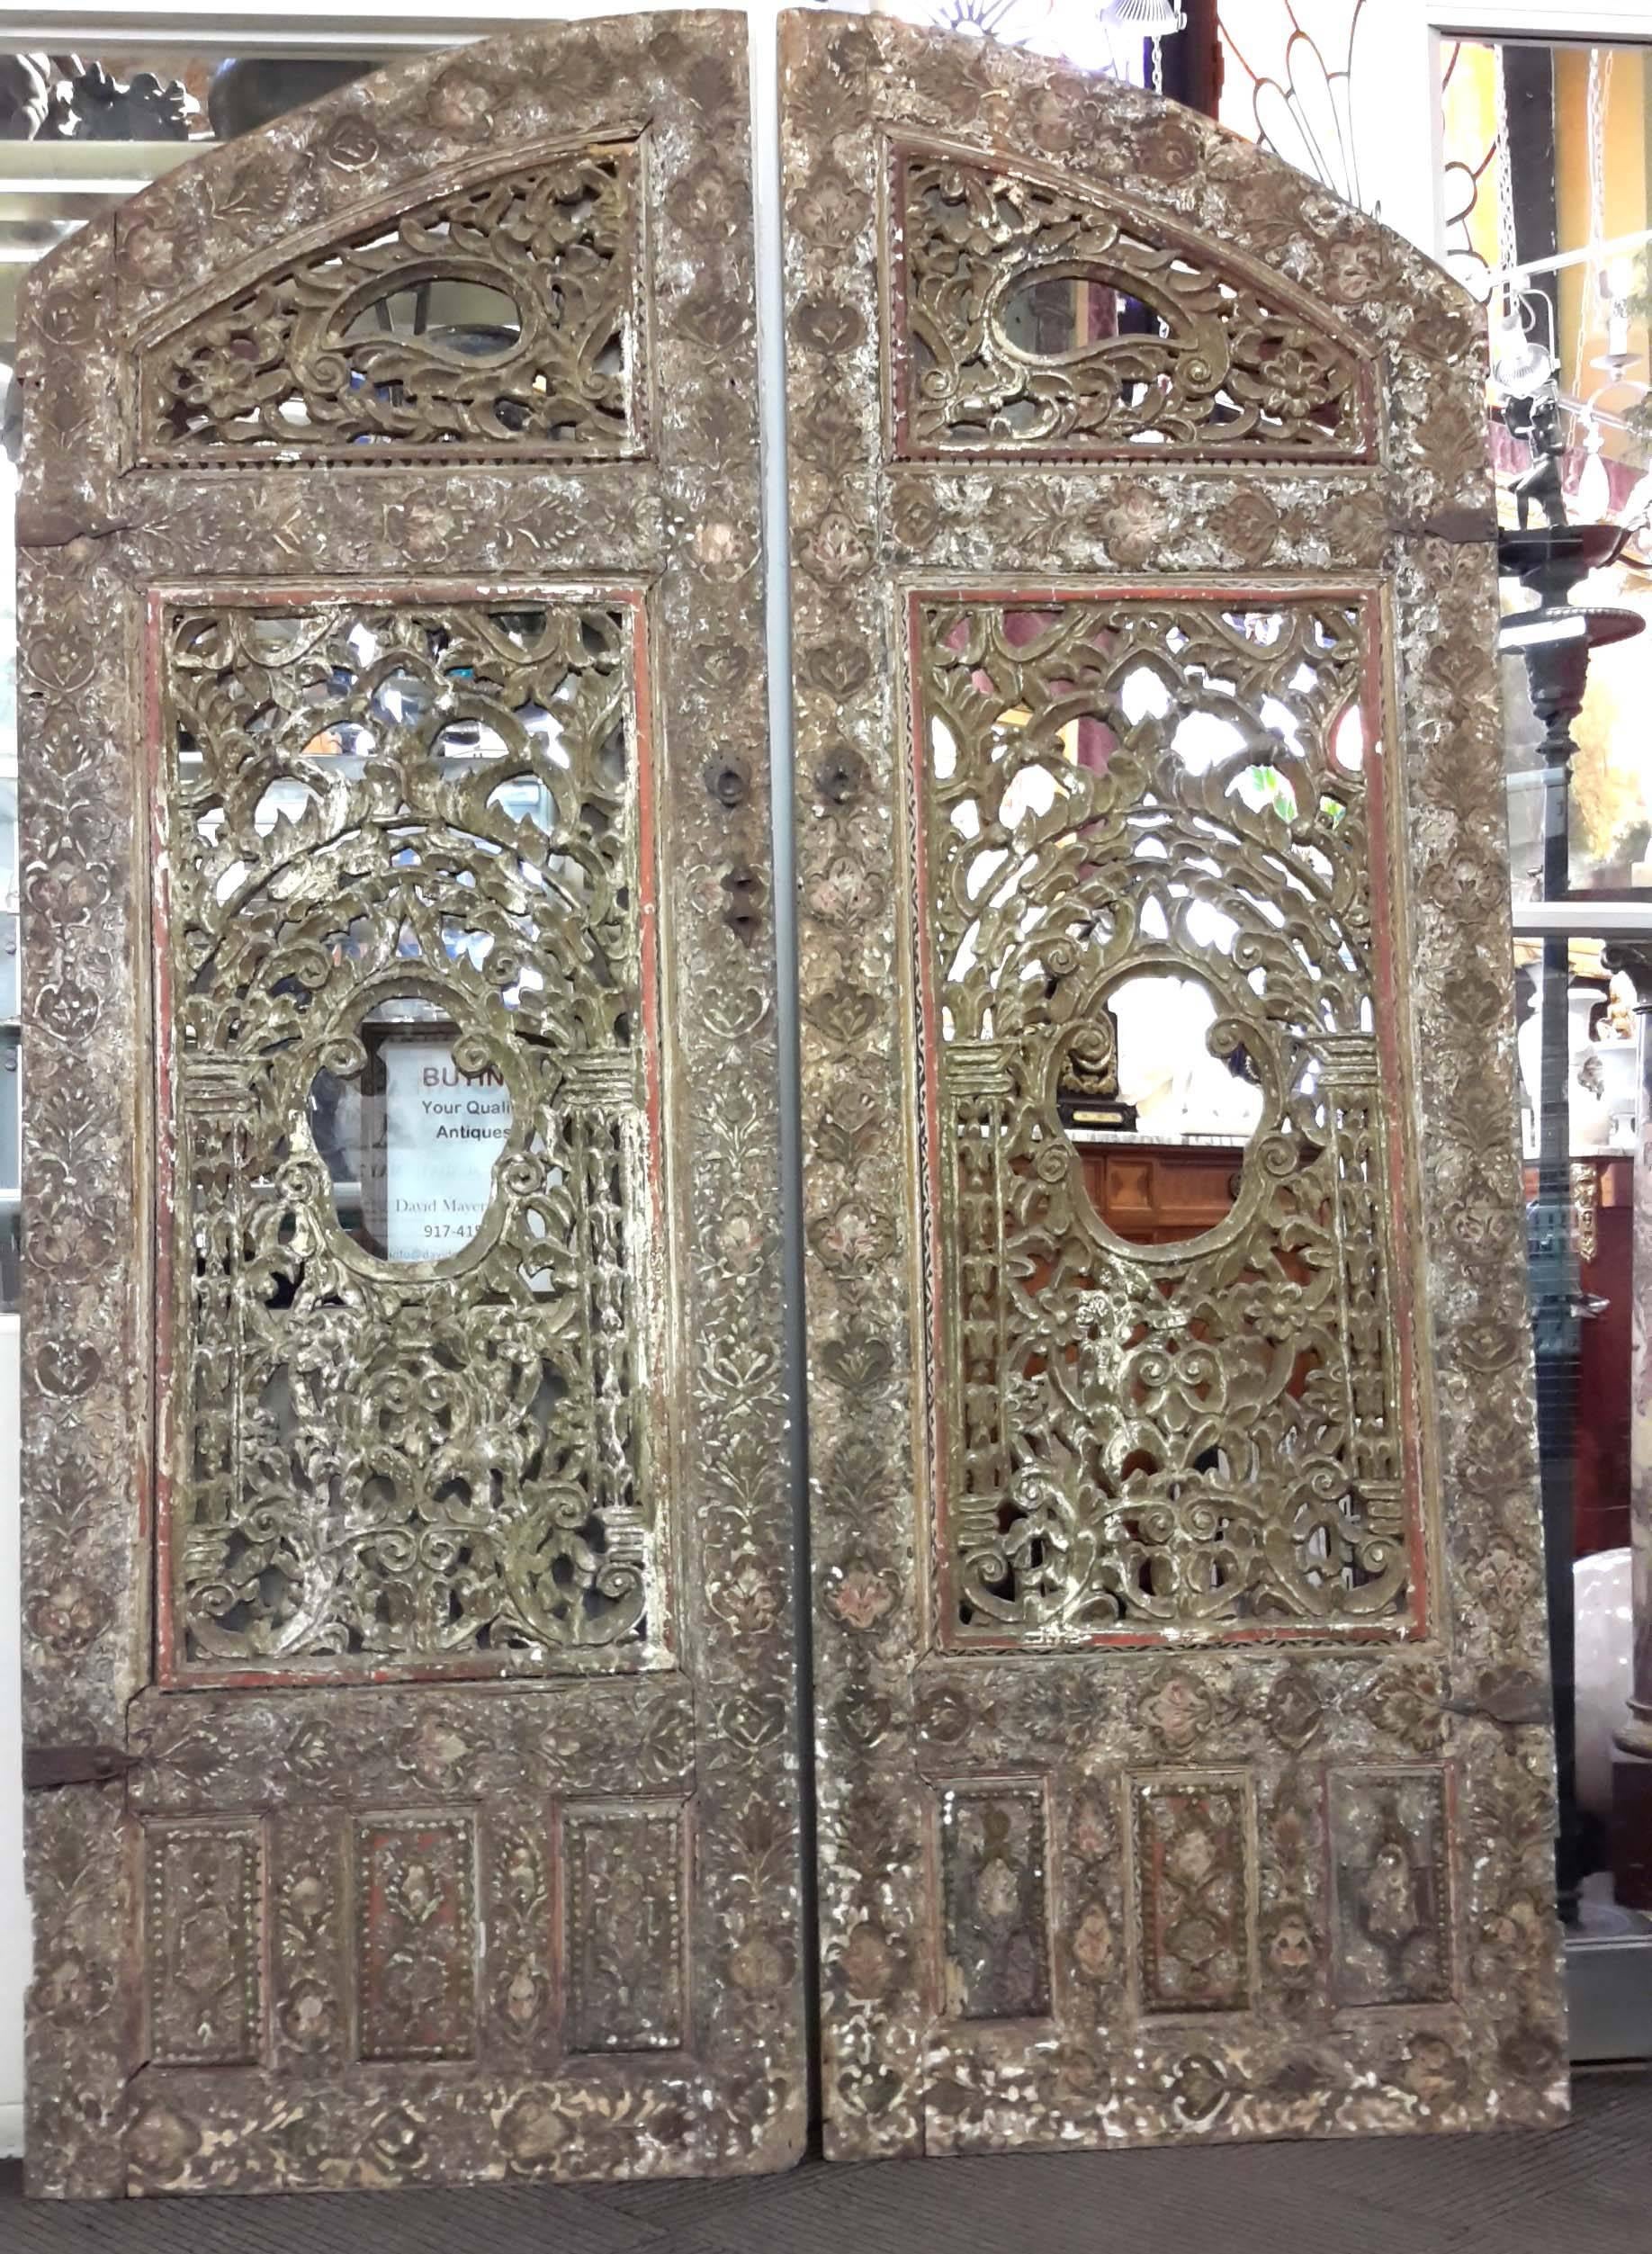 Beautifully carved and poly-chromed. These are altar doors from an Ottoman mosque.
Height is approximately 80 inches.
Each door is approximately 27 inches wide
Depth approximately 2 inches.